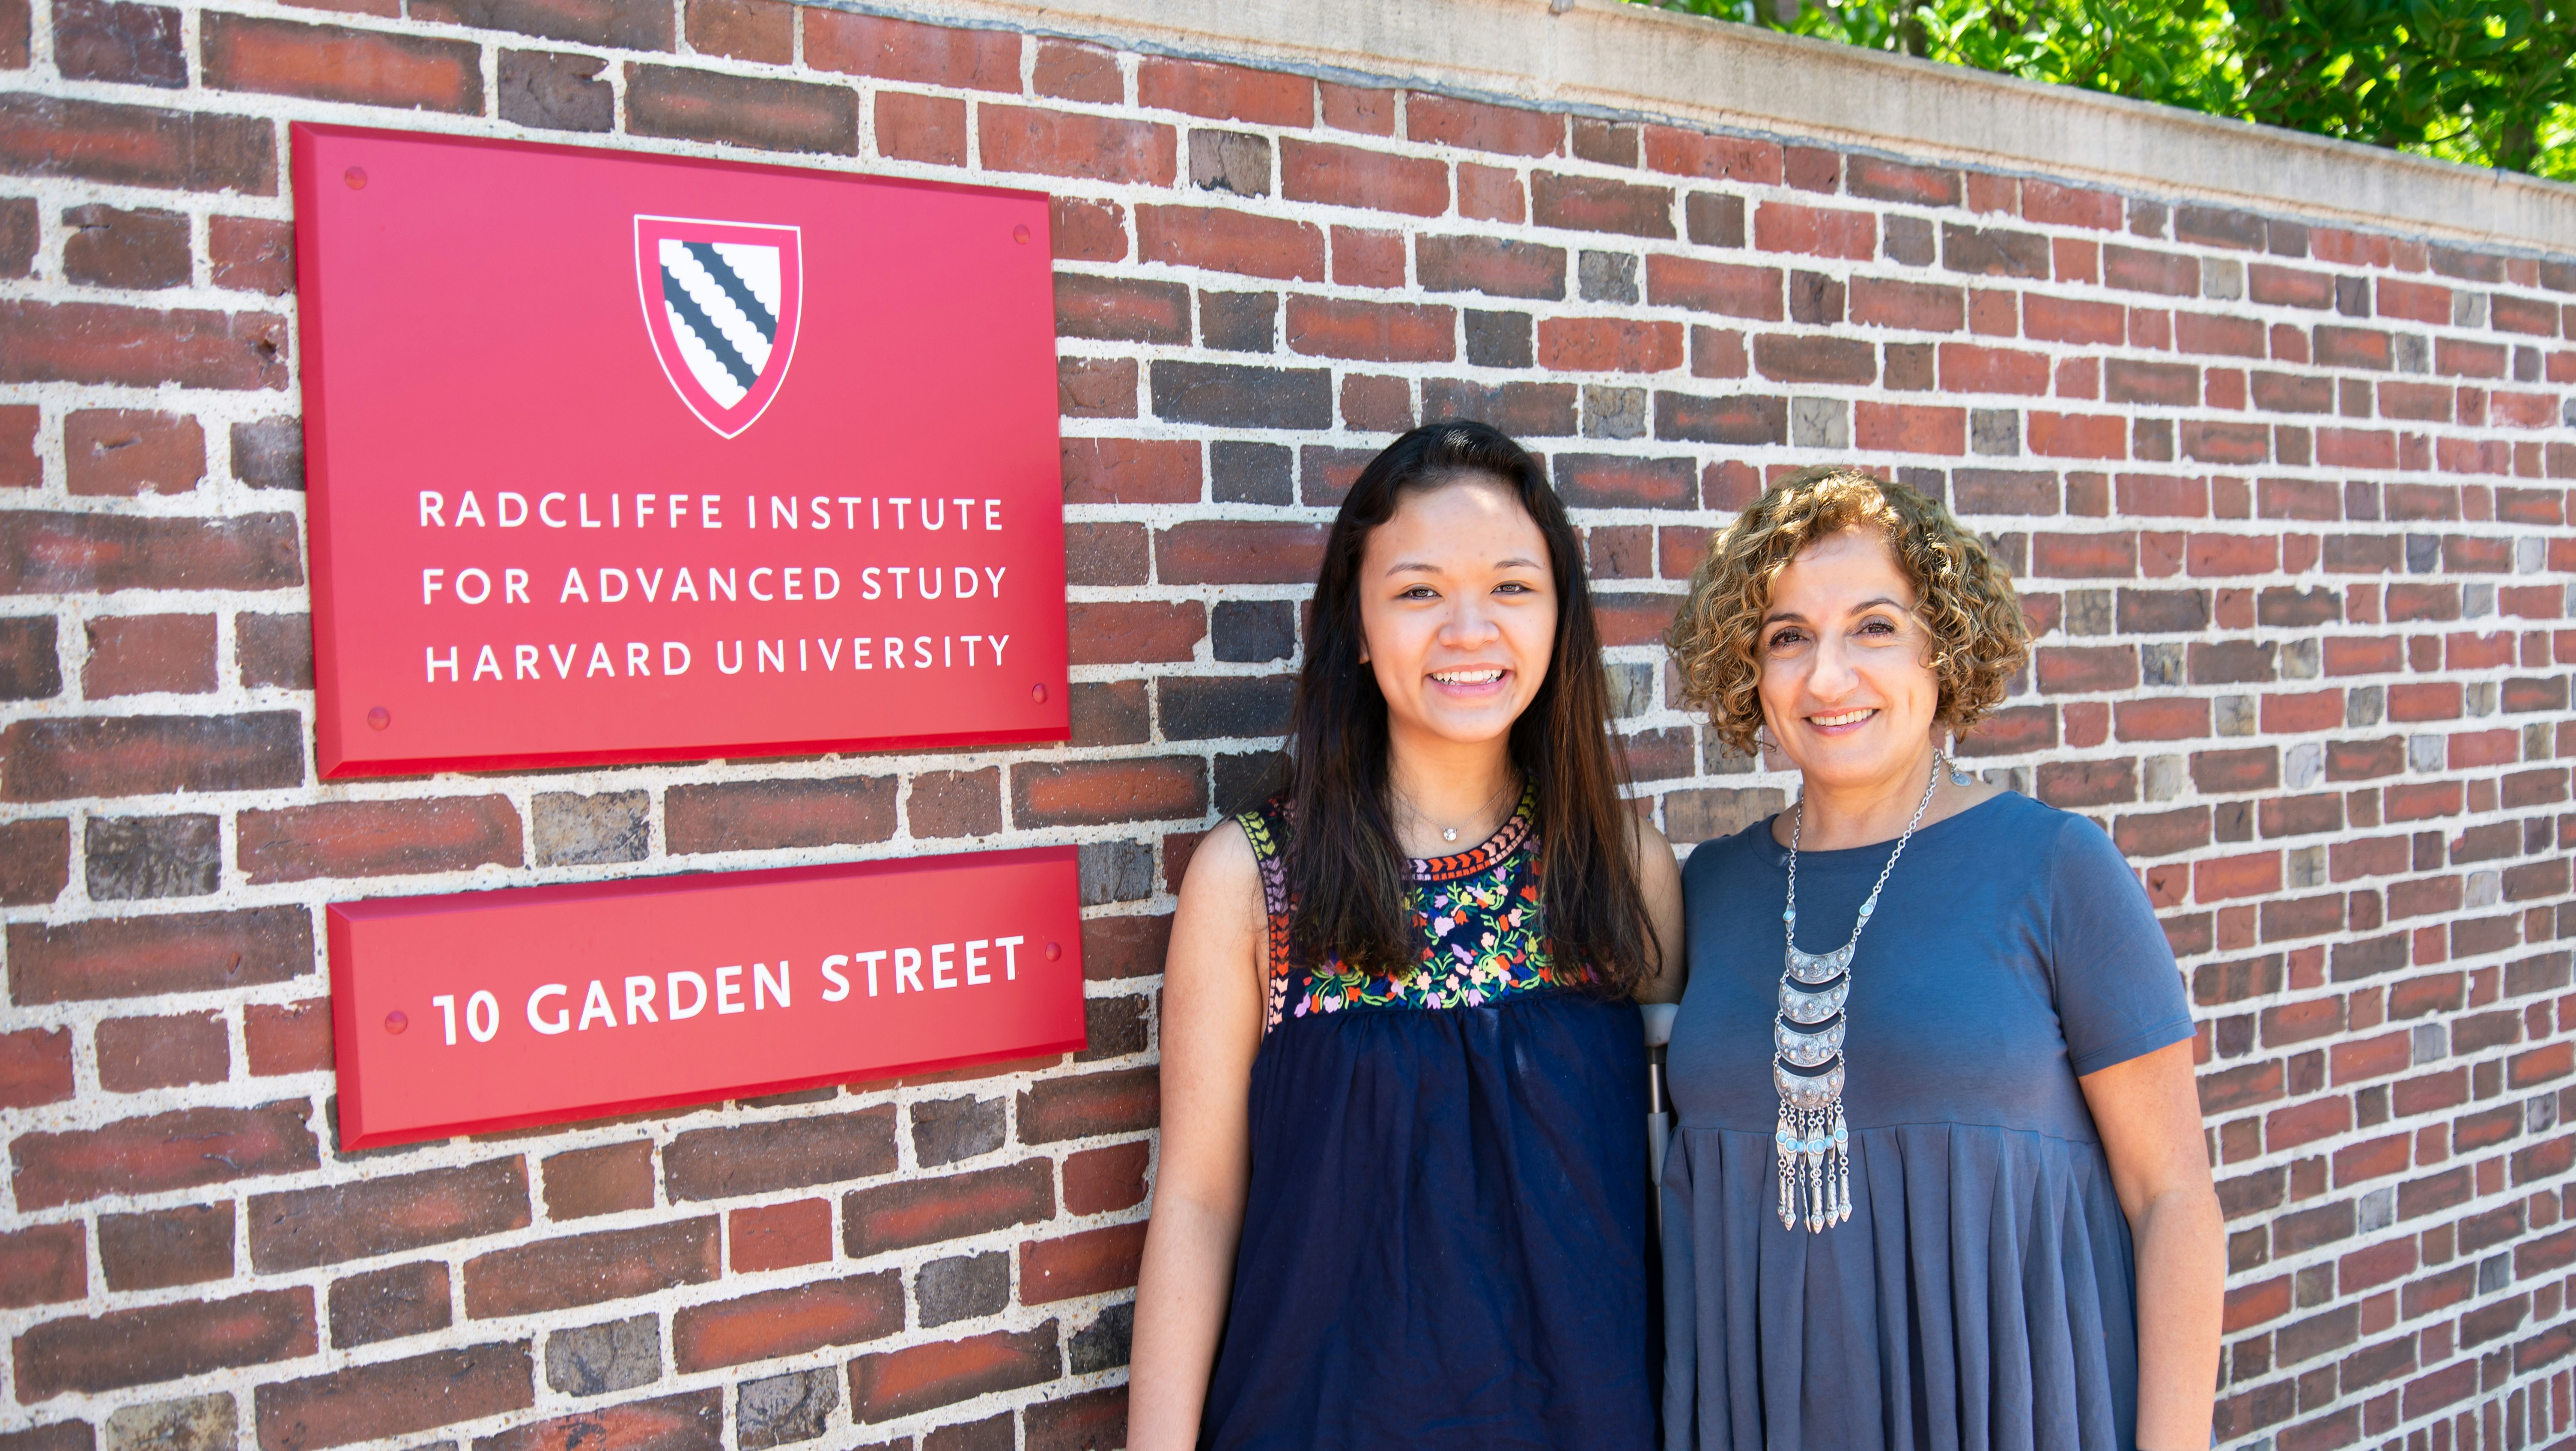 Two women stand next to a red sign for the Radcliffe Institute for Advanced Study posted on a brick wall.